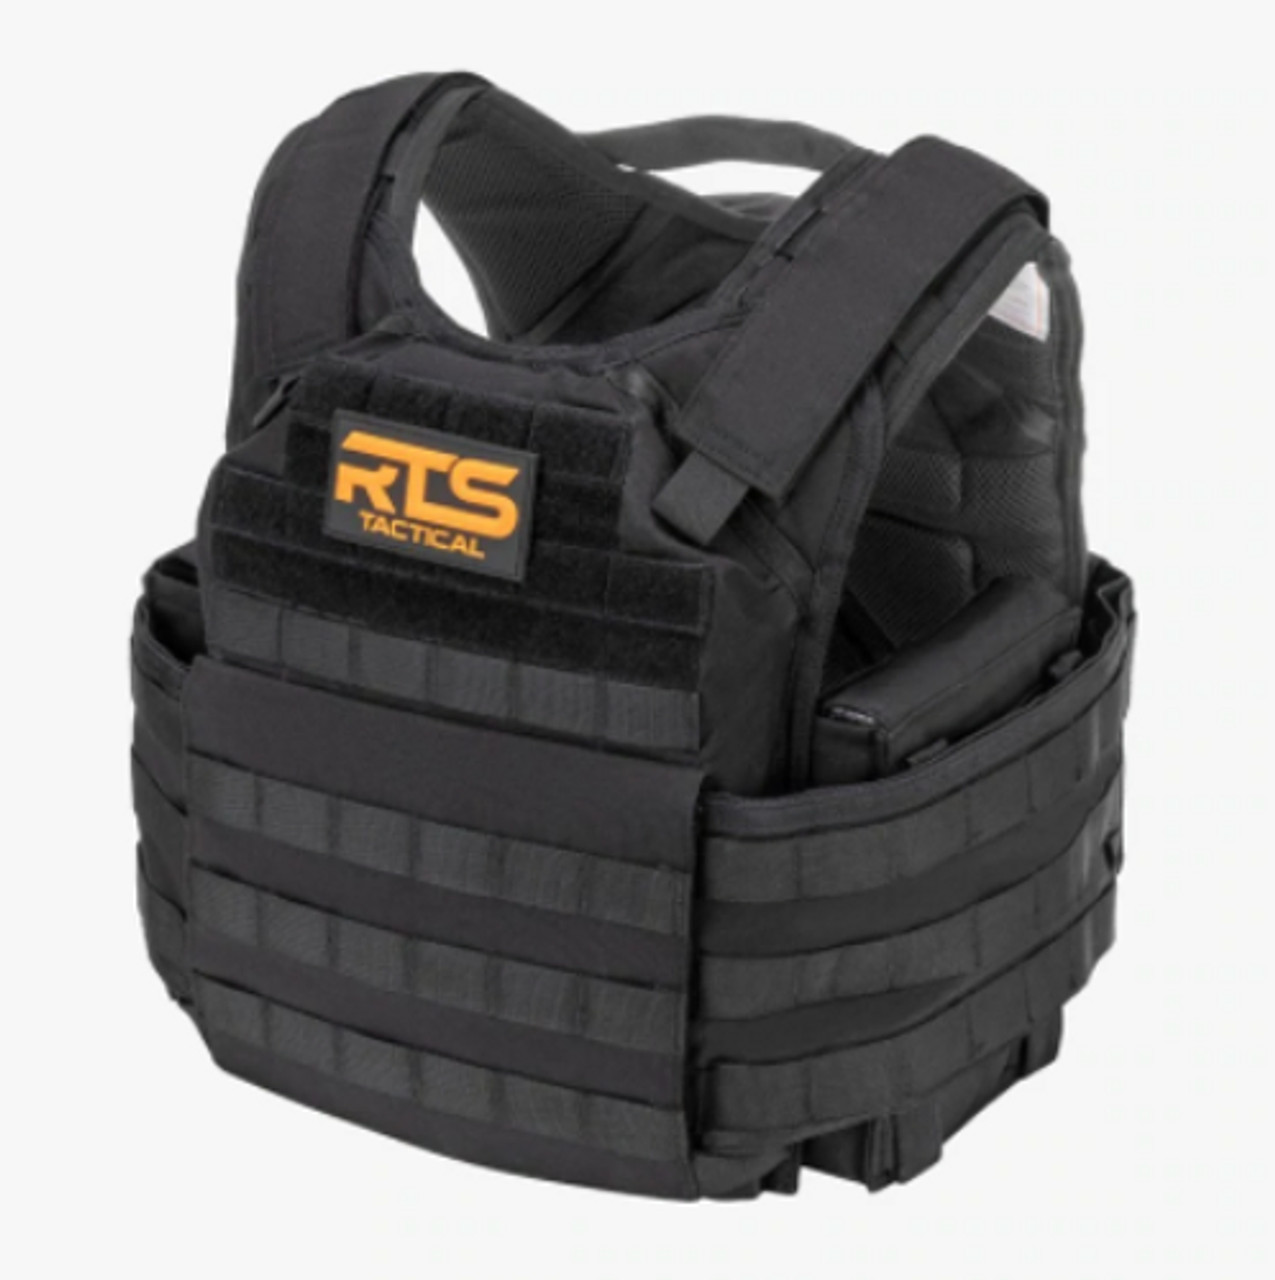 RTS TACTICAL PREMIUM PLATE CARRIER 10X12 - FRONT LEFT